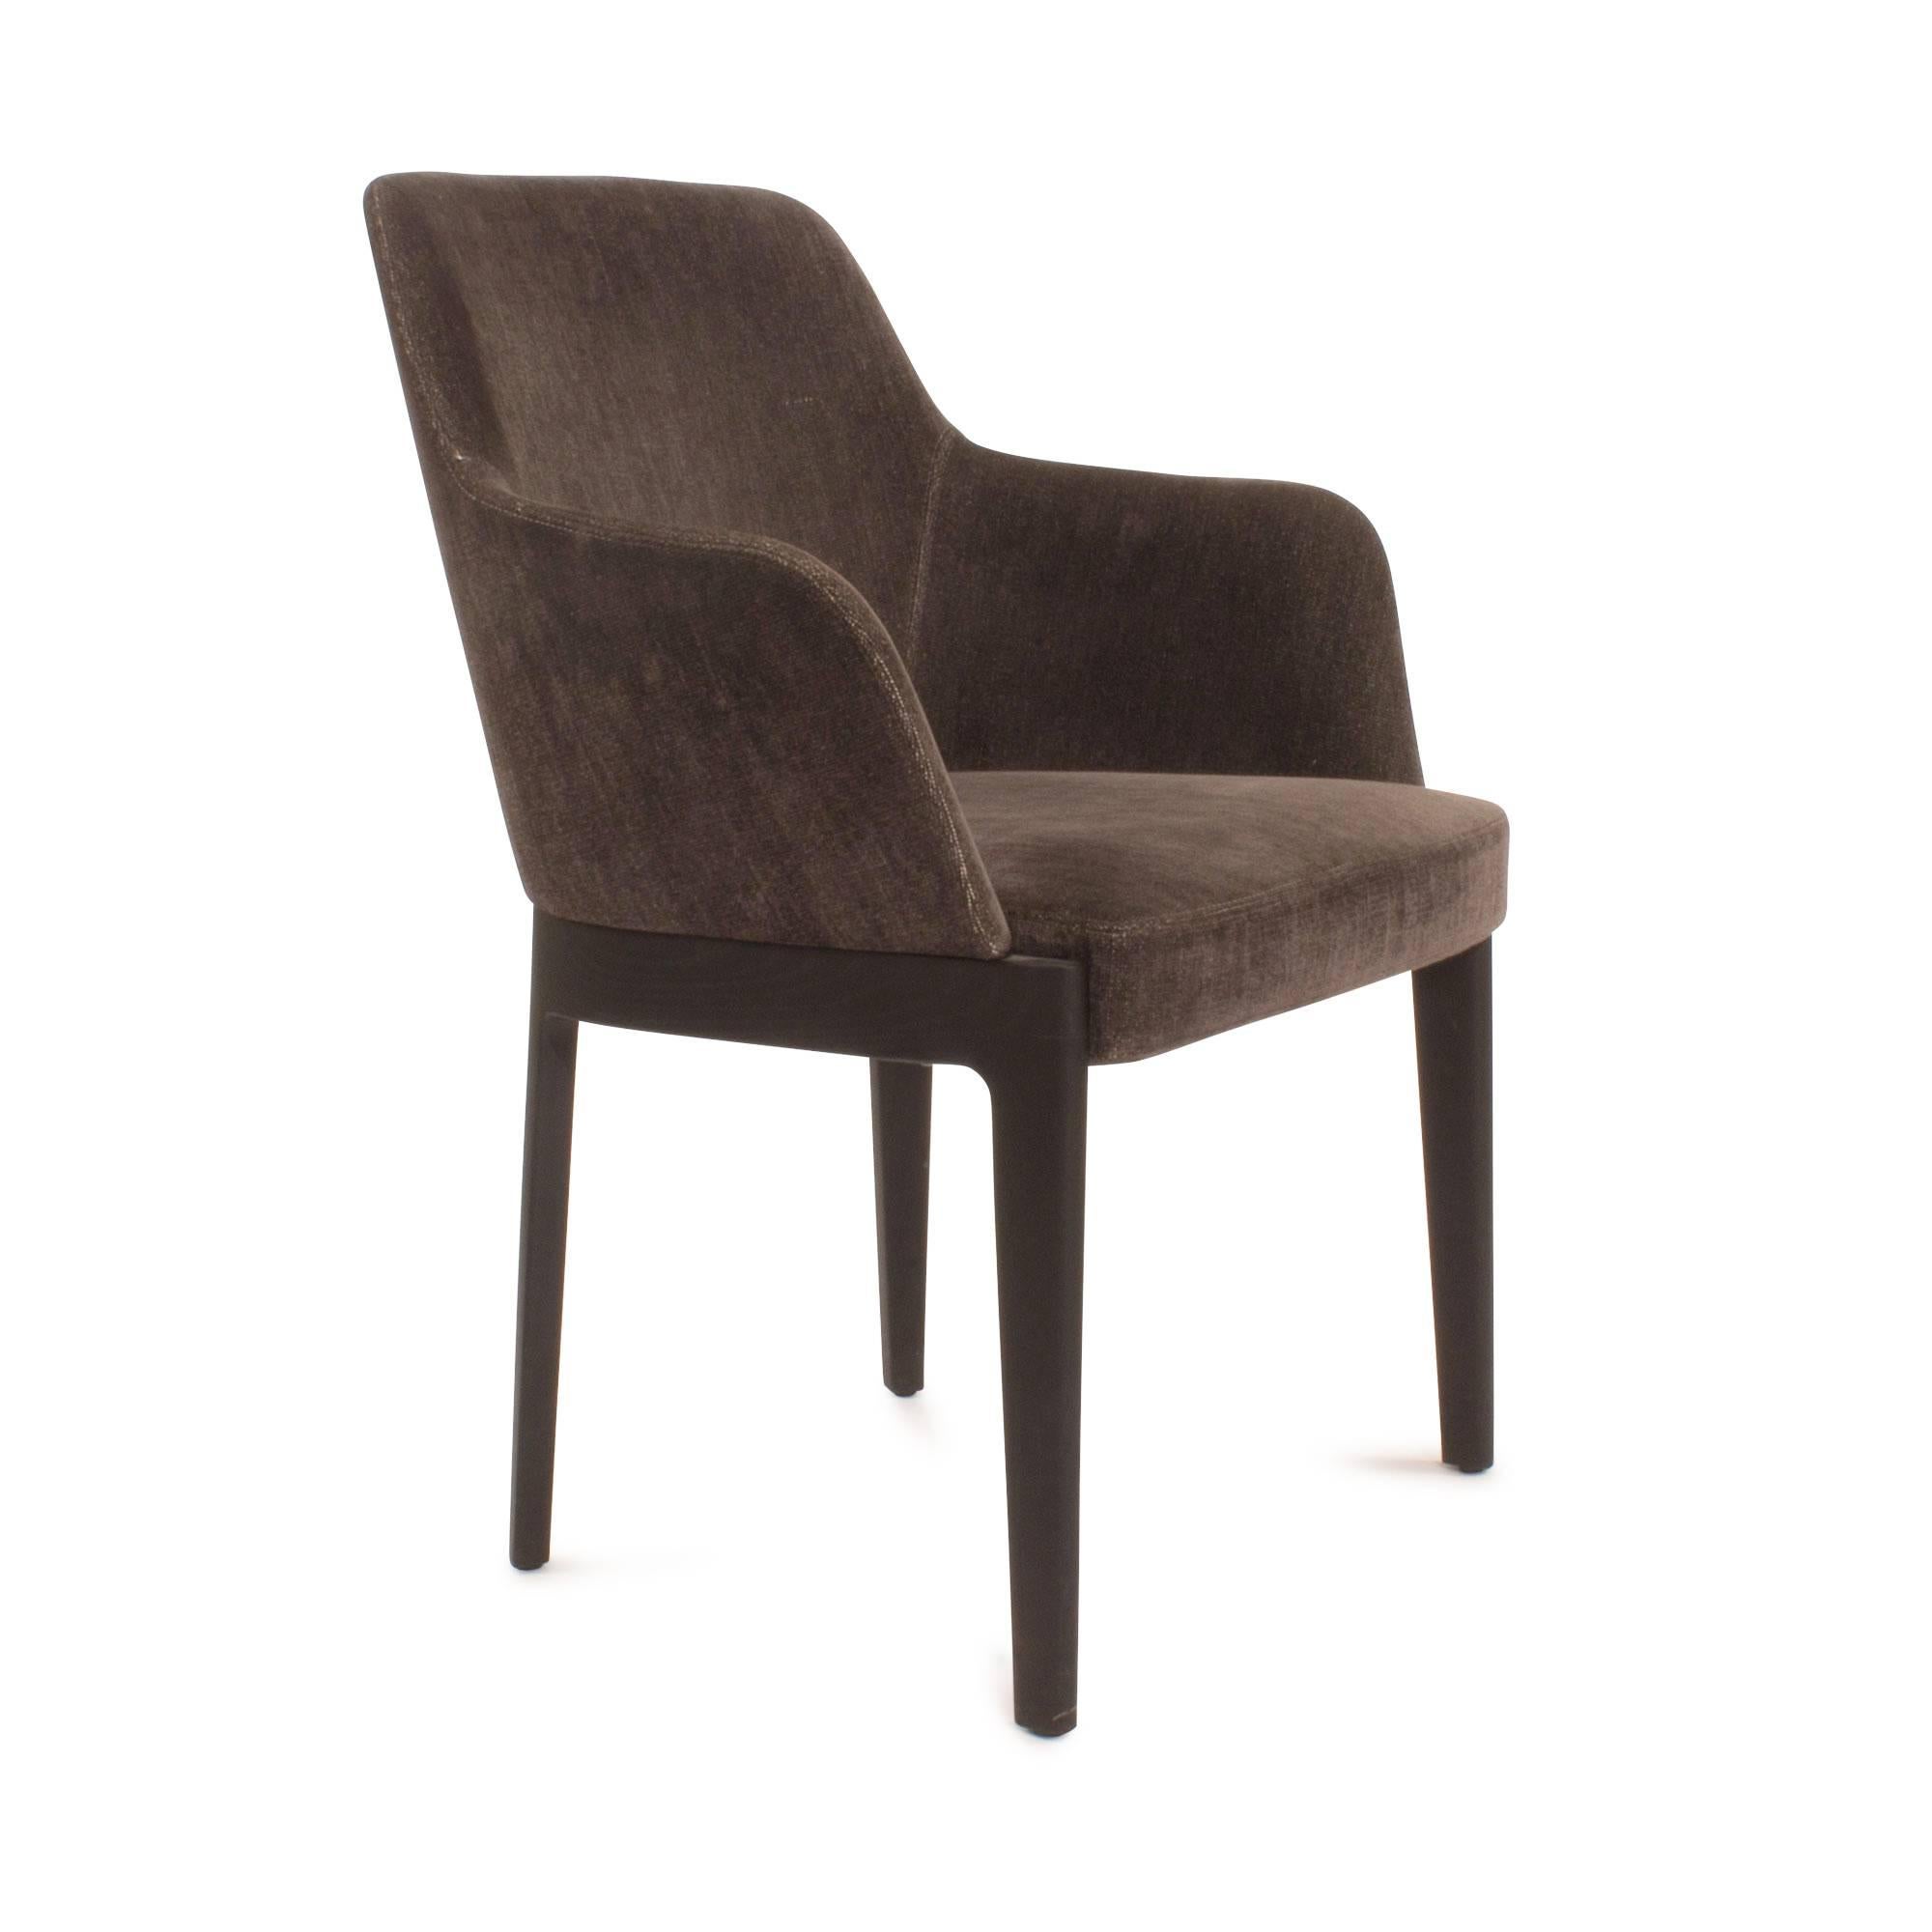 The Chelsea chair summarizes the essence of contemporary design and the memory of tradition. It is an ideal tendency towards the future which brings with it the knowledge. Chelsea is a series of chairs in varied styles, particularly well-suited to